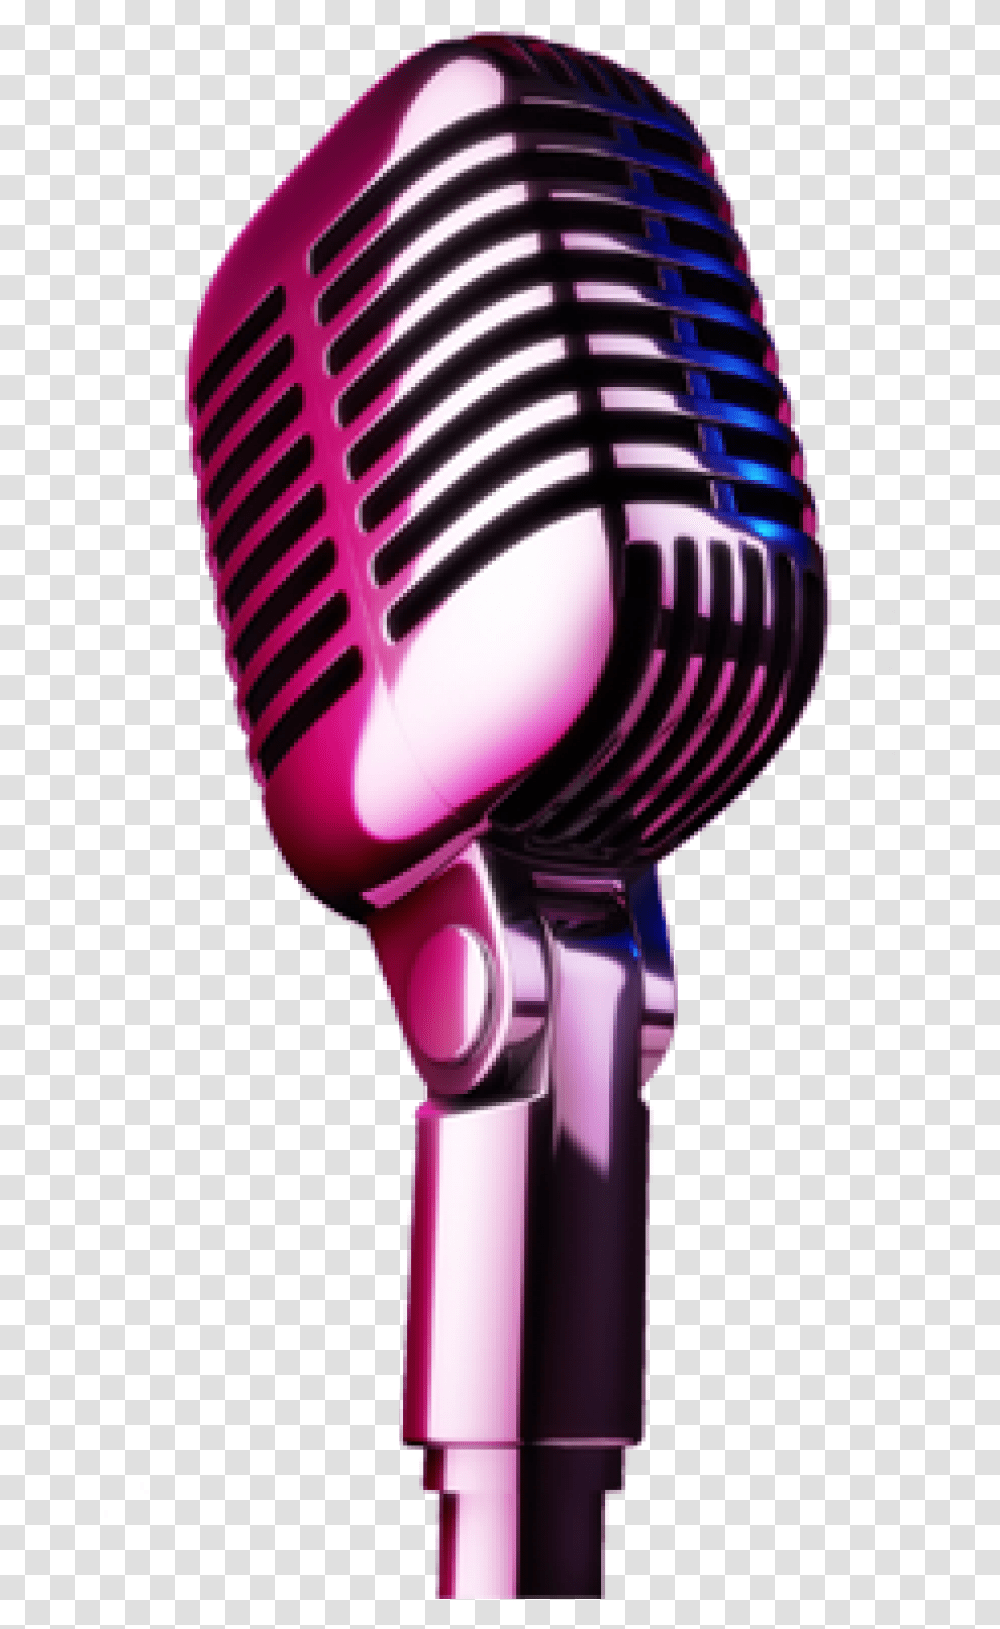 Microphone Comedy Skagit Valley College Campus Comedy Club, Electrical Device, Appliance, Blow Dryer, Hair Drier Transparent Png